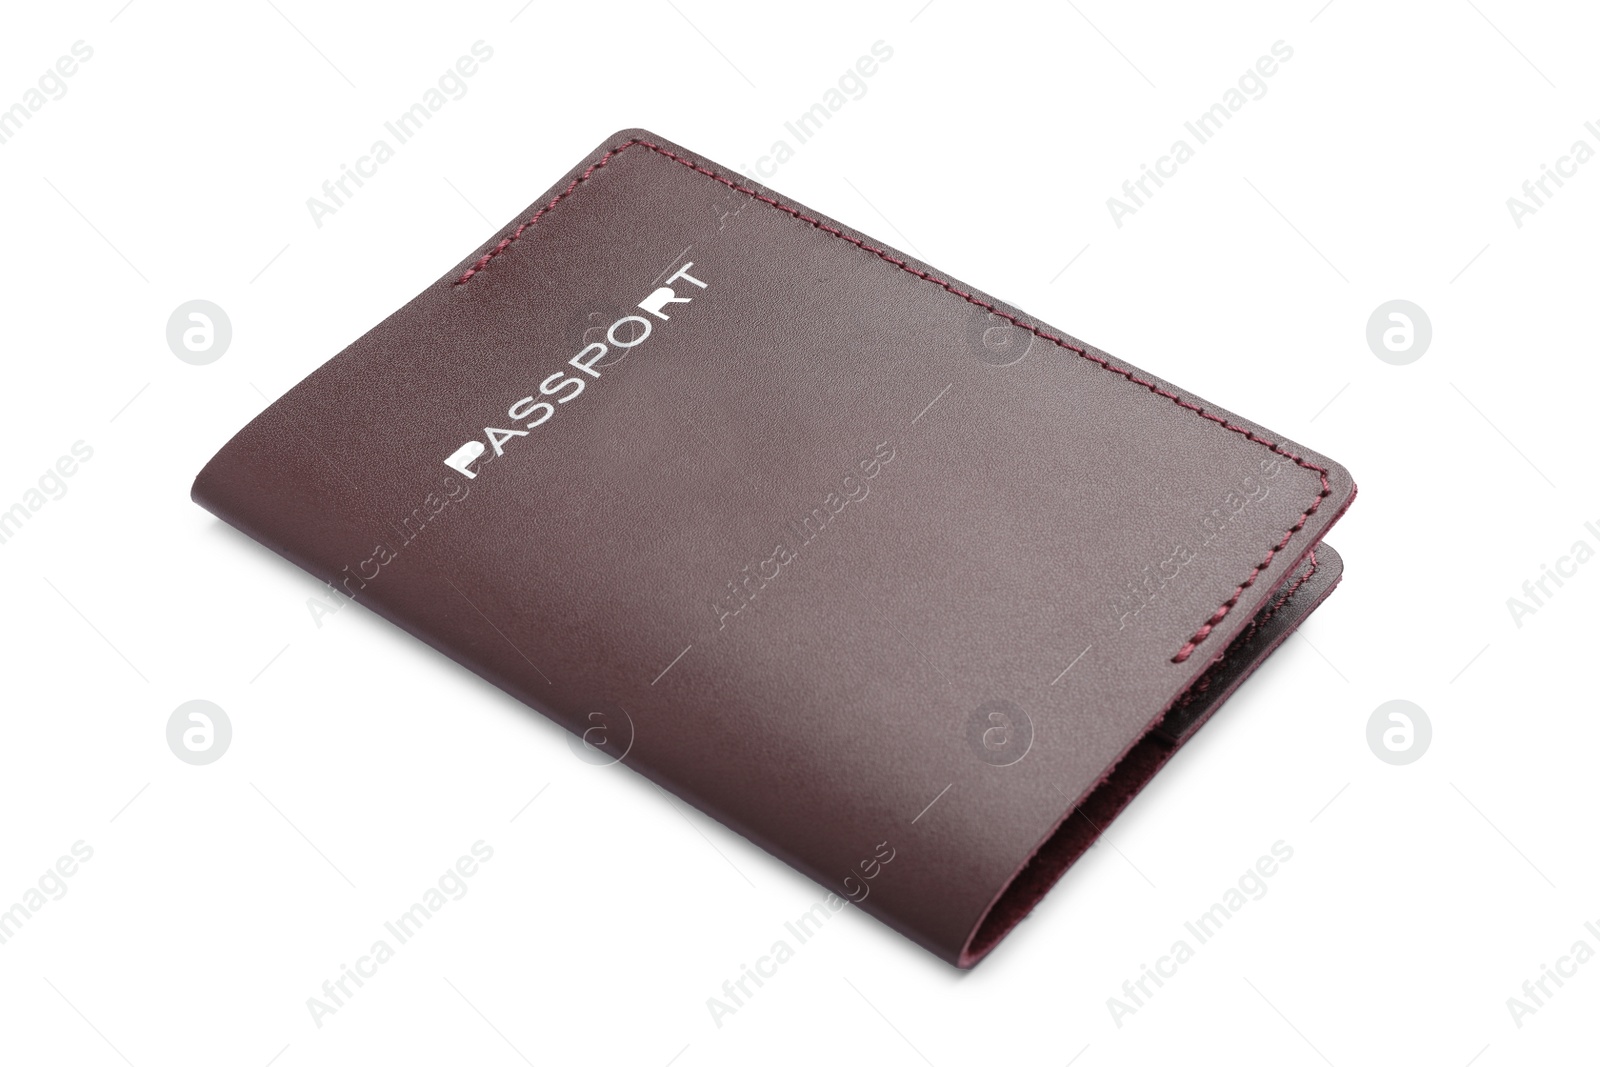 Photo of Passport in brown leather case isolated on white